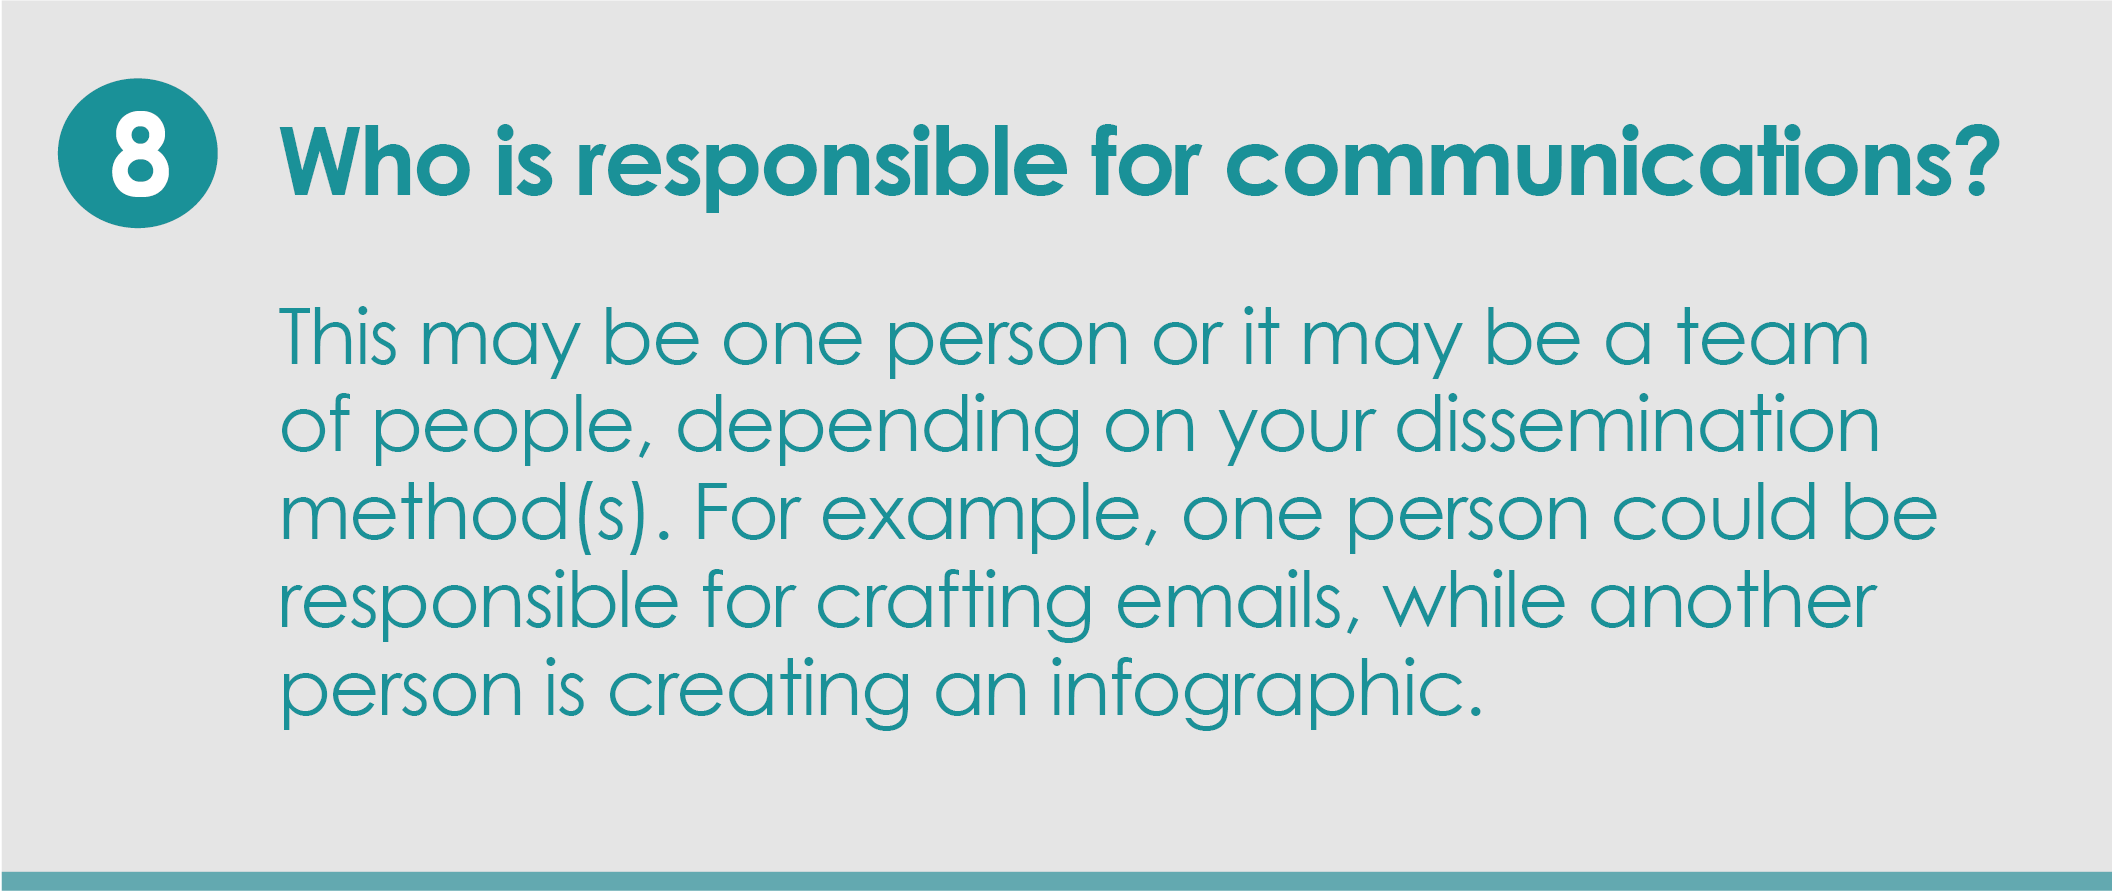 Step 8: Who is responsible for communications? This may be one person or it may be a team of people, depending on your dissemination method(s). For example, one person could be responsible for crafting emails, while another person is creating an infographic.